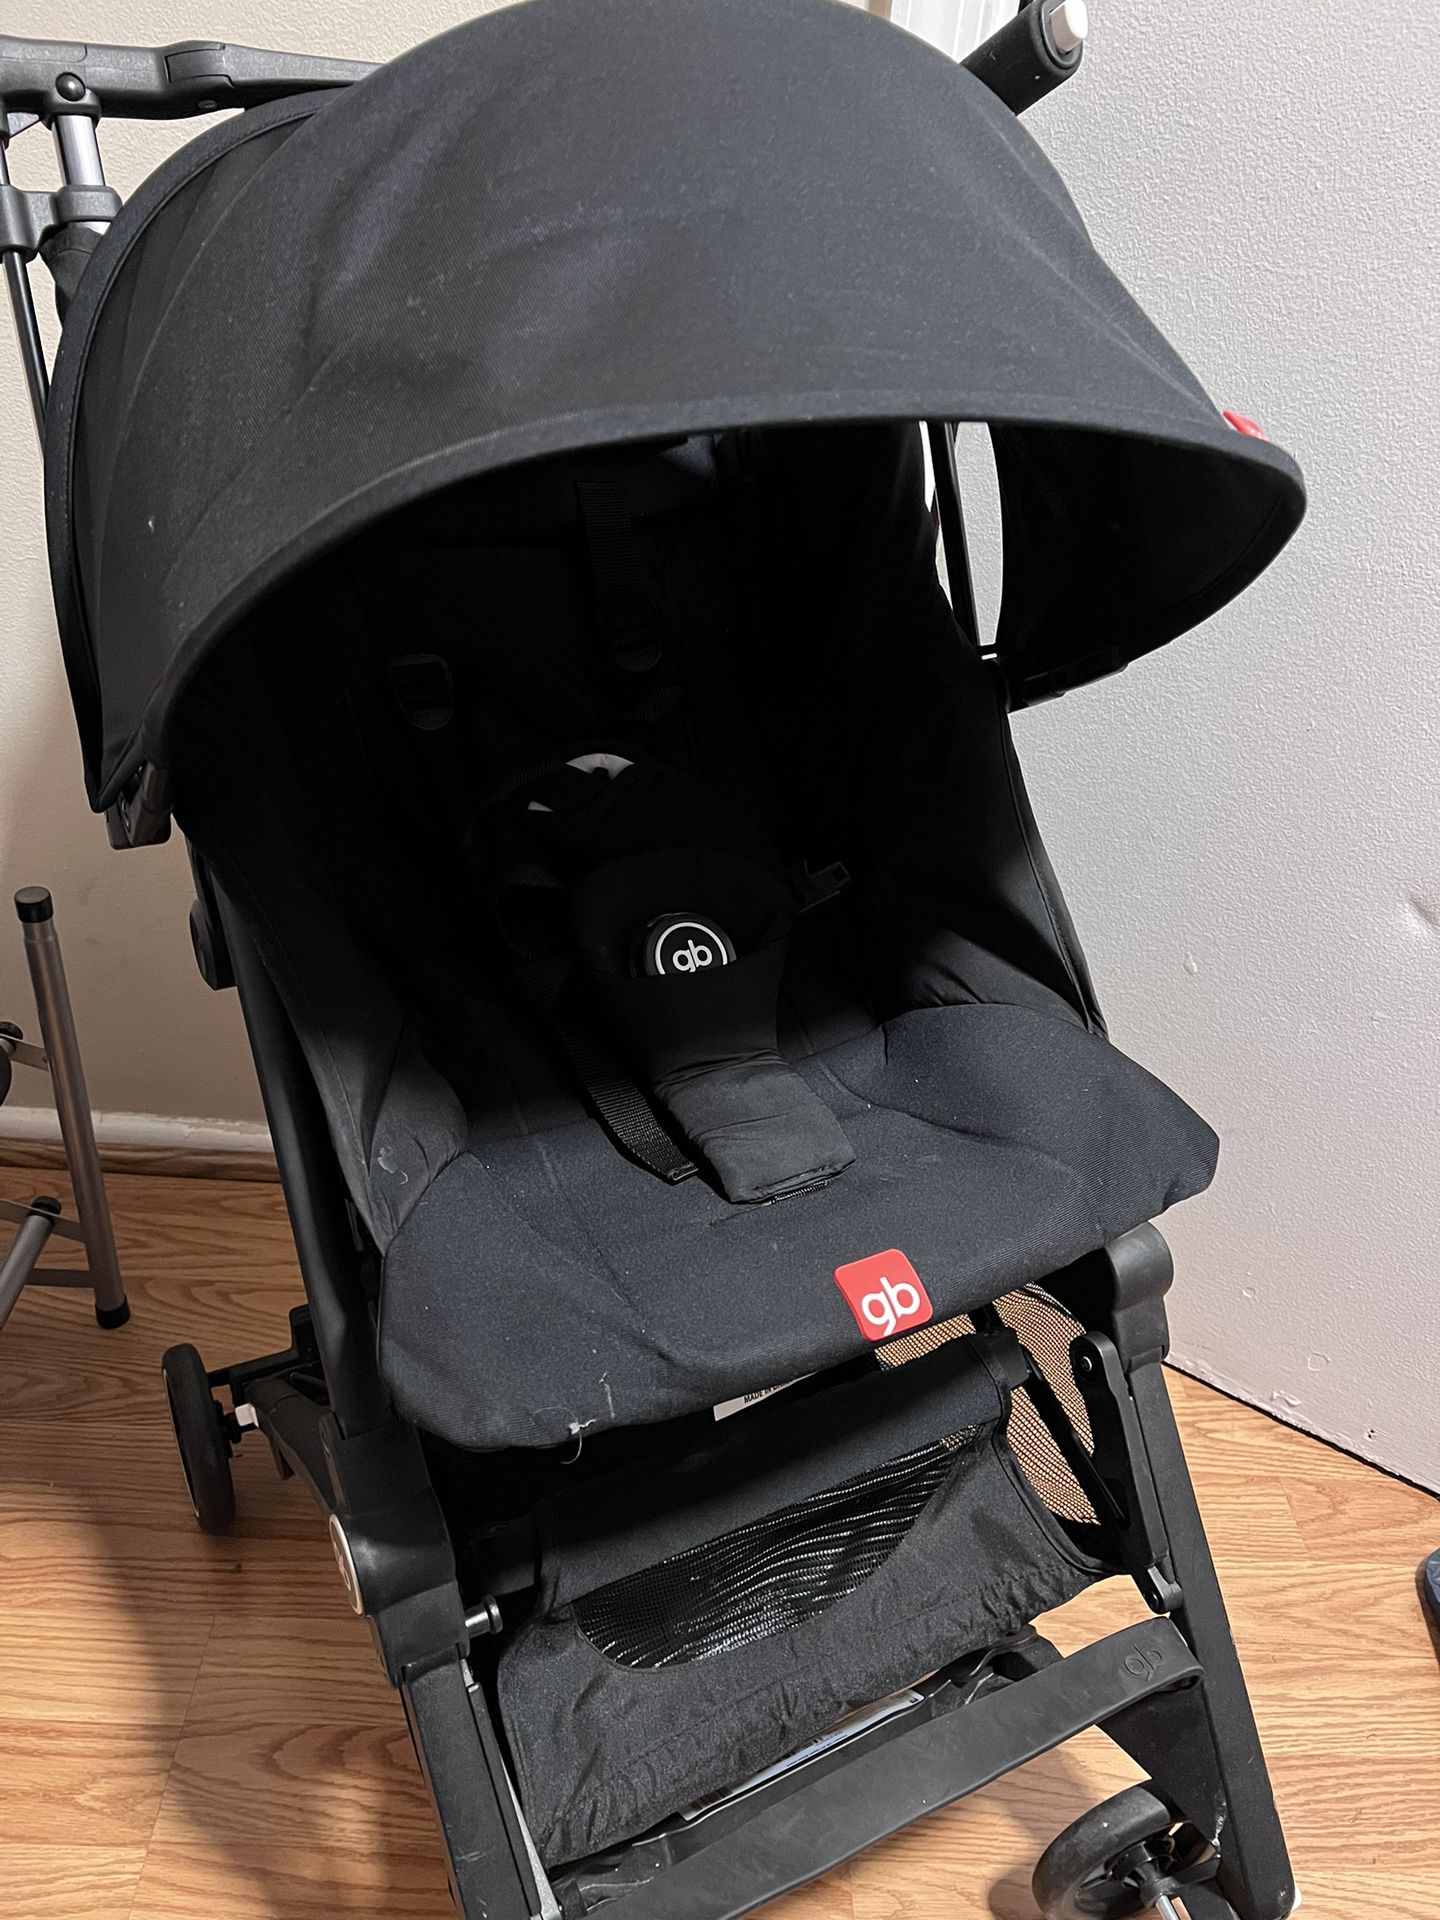 gb Pockit Ultra Compact Lightweight Travel Stroller with Canopy and Reclining Seat